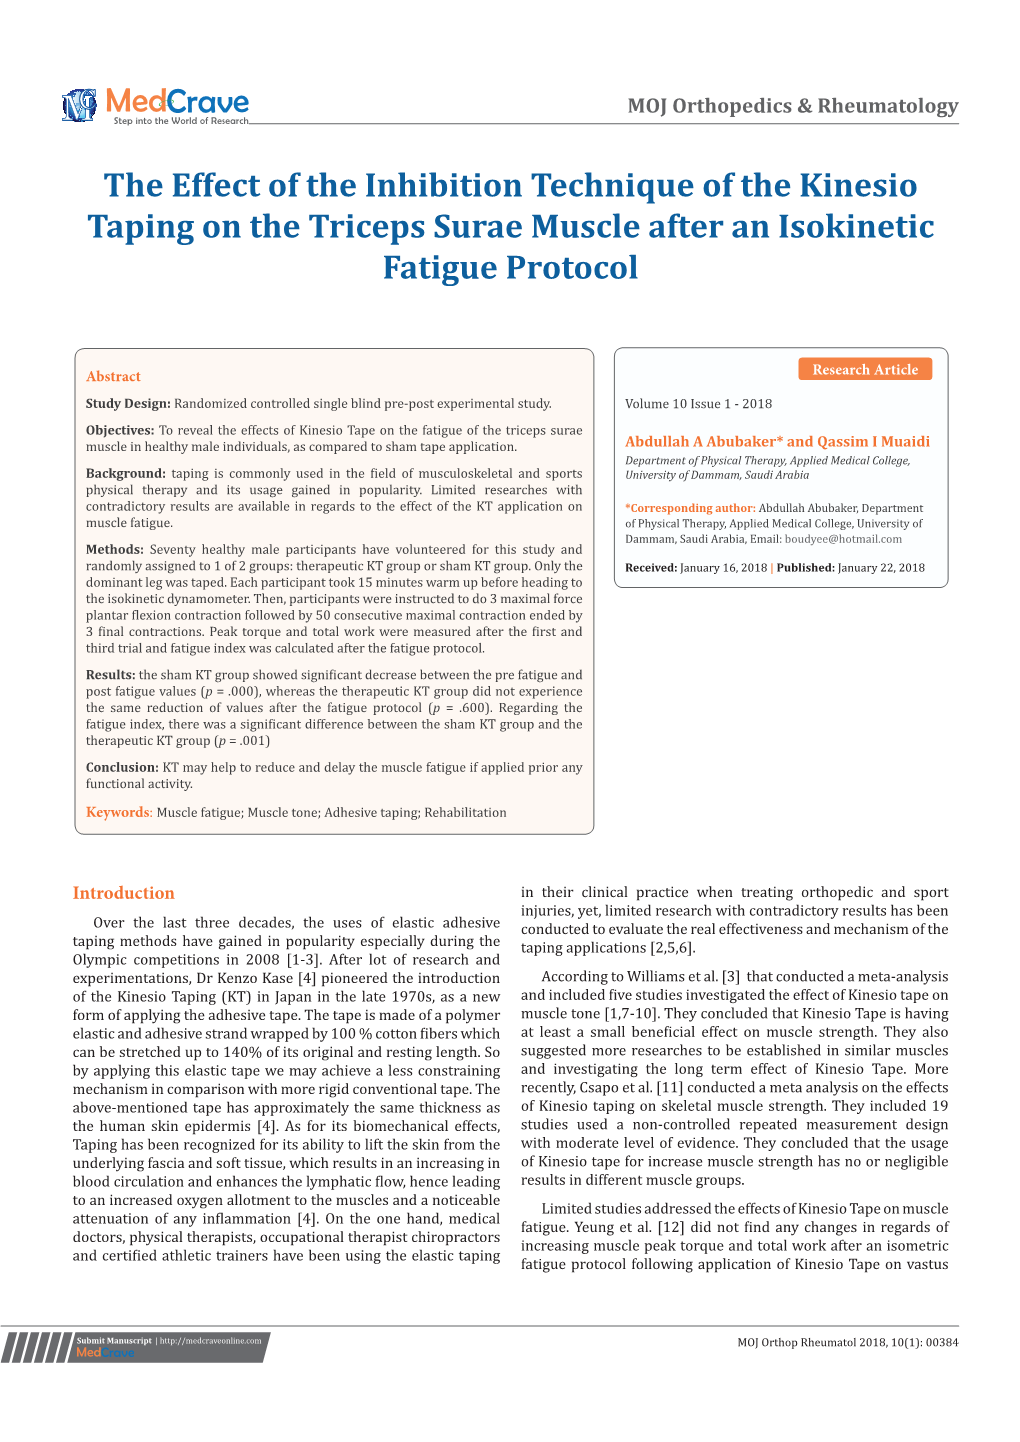 The Effect of the Inhibition Technique of the Kinesio Taping on the Triceps Surae Muscle After an Isokinetic Fatigue Protocol